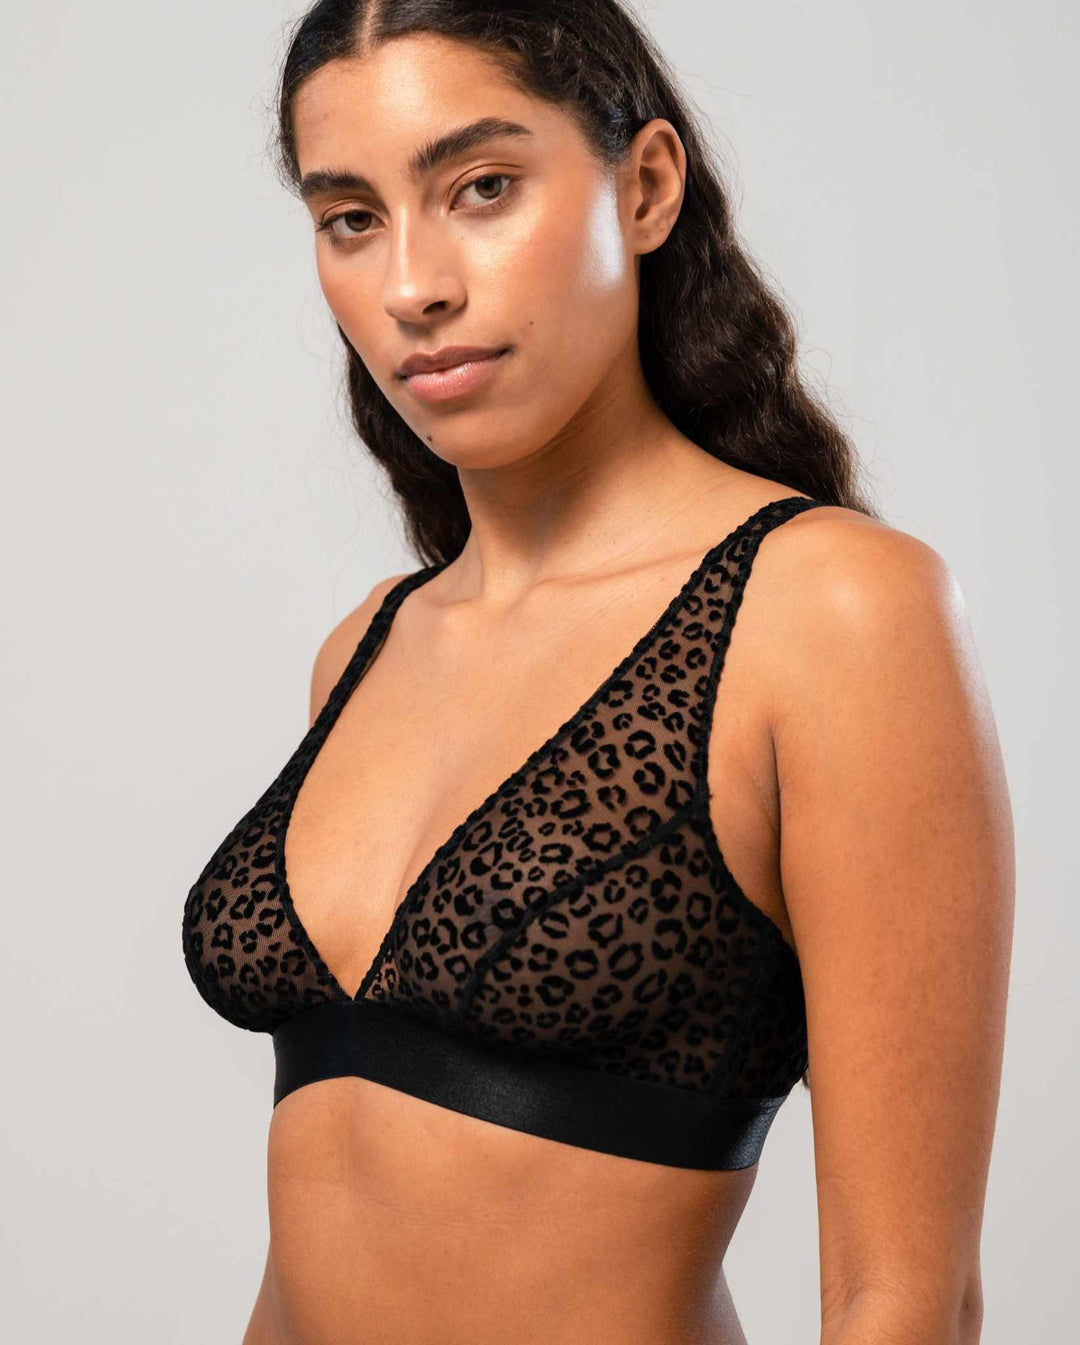 Wholesale deep v lace bra For An Irresistible Look 